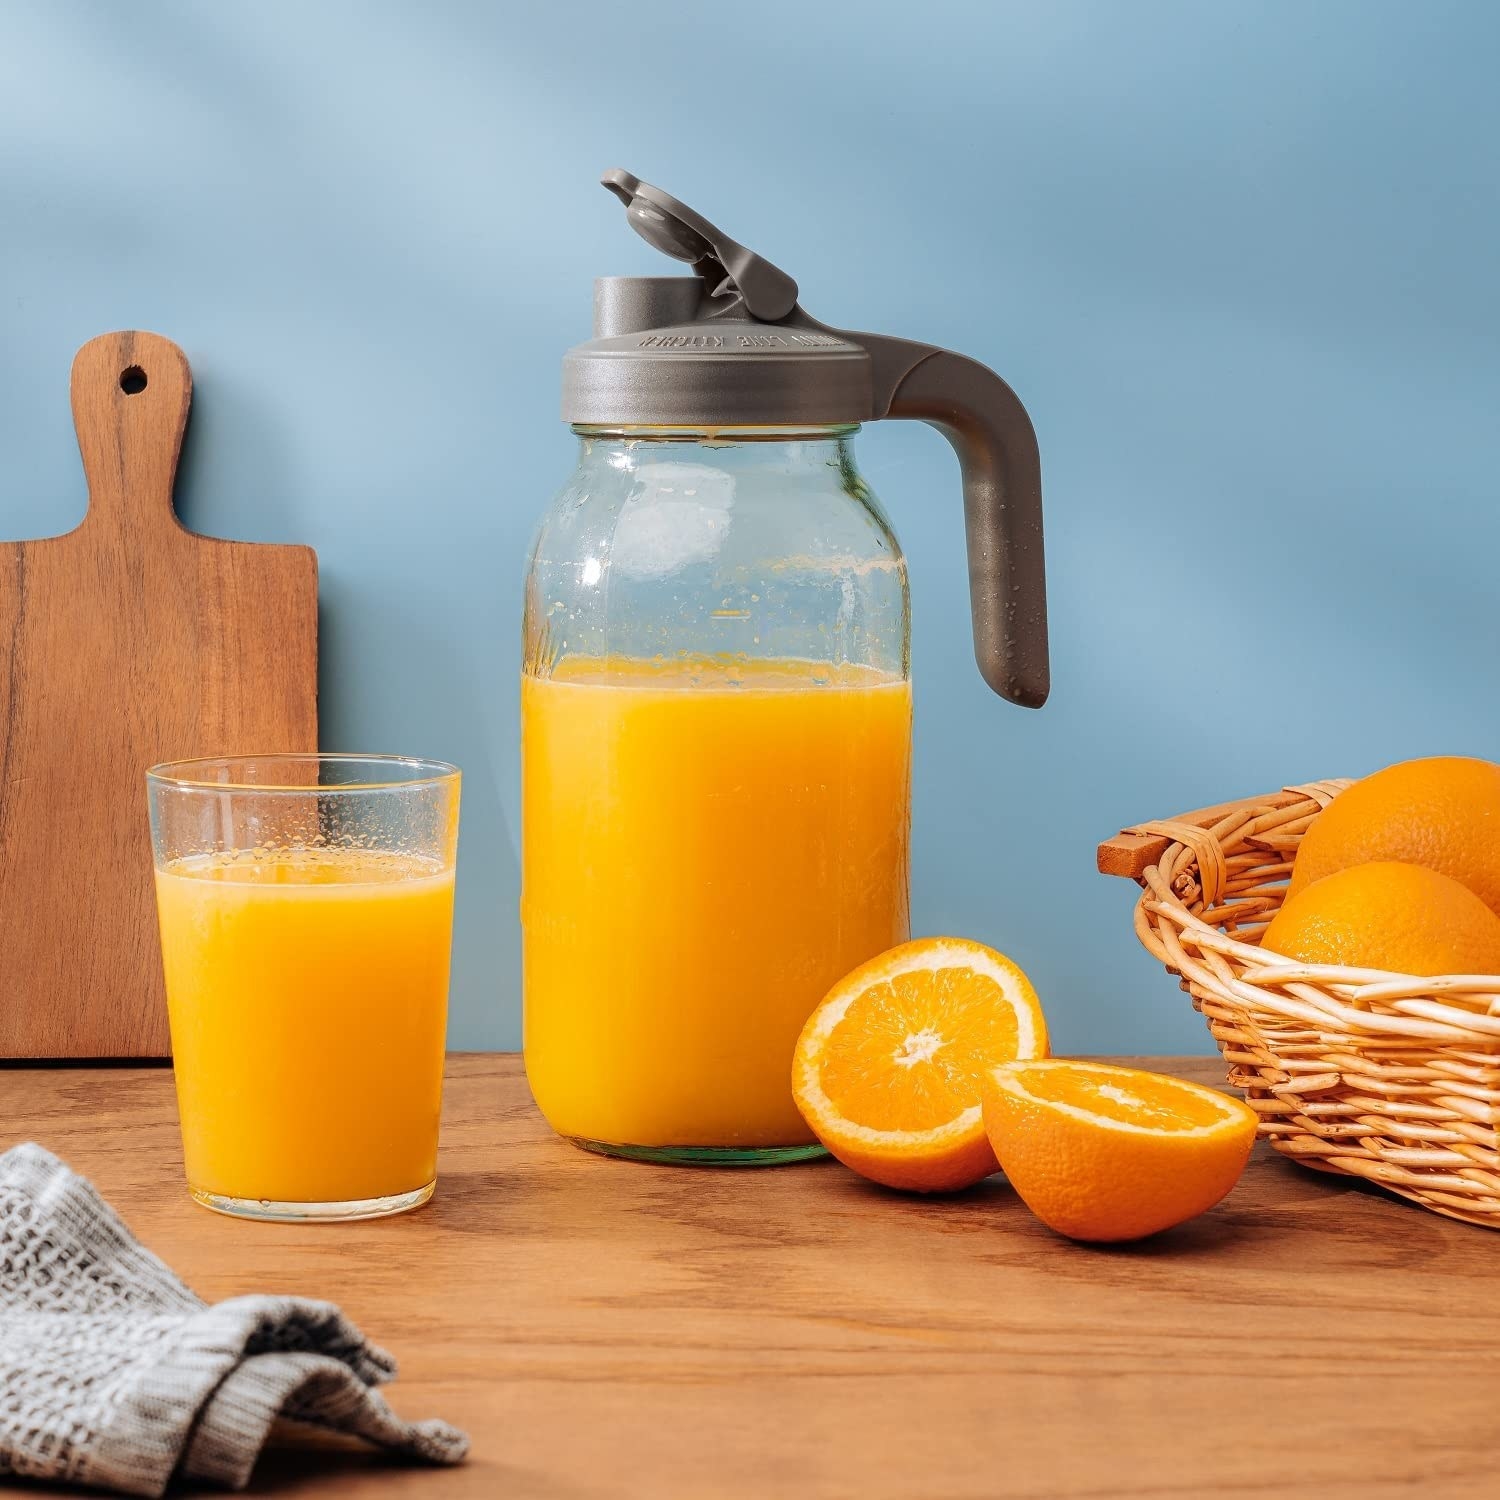 A Mason jar filled with orange juice and a glass cup beside it